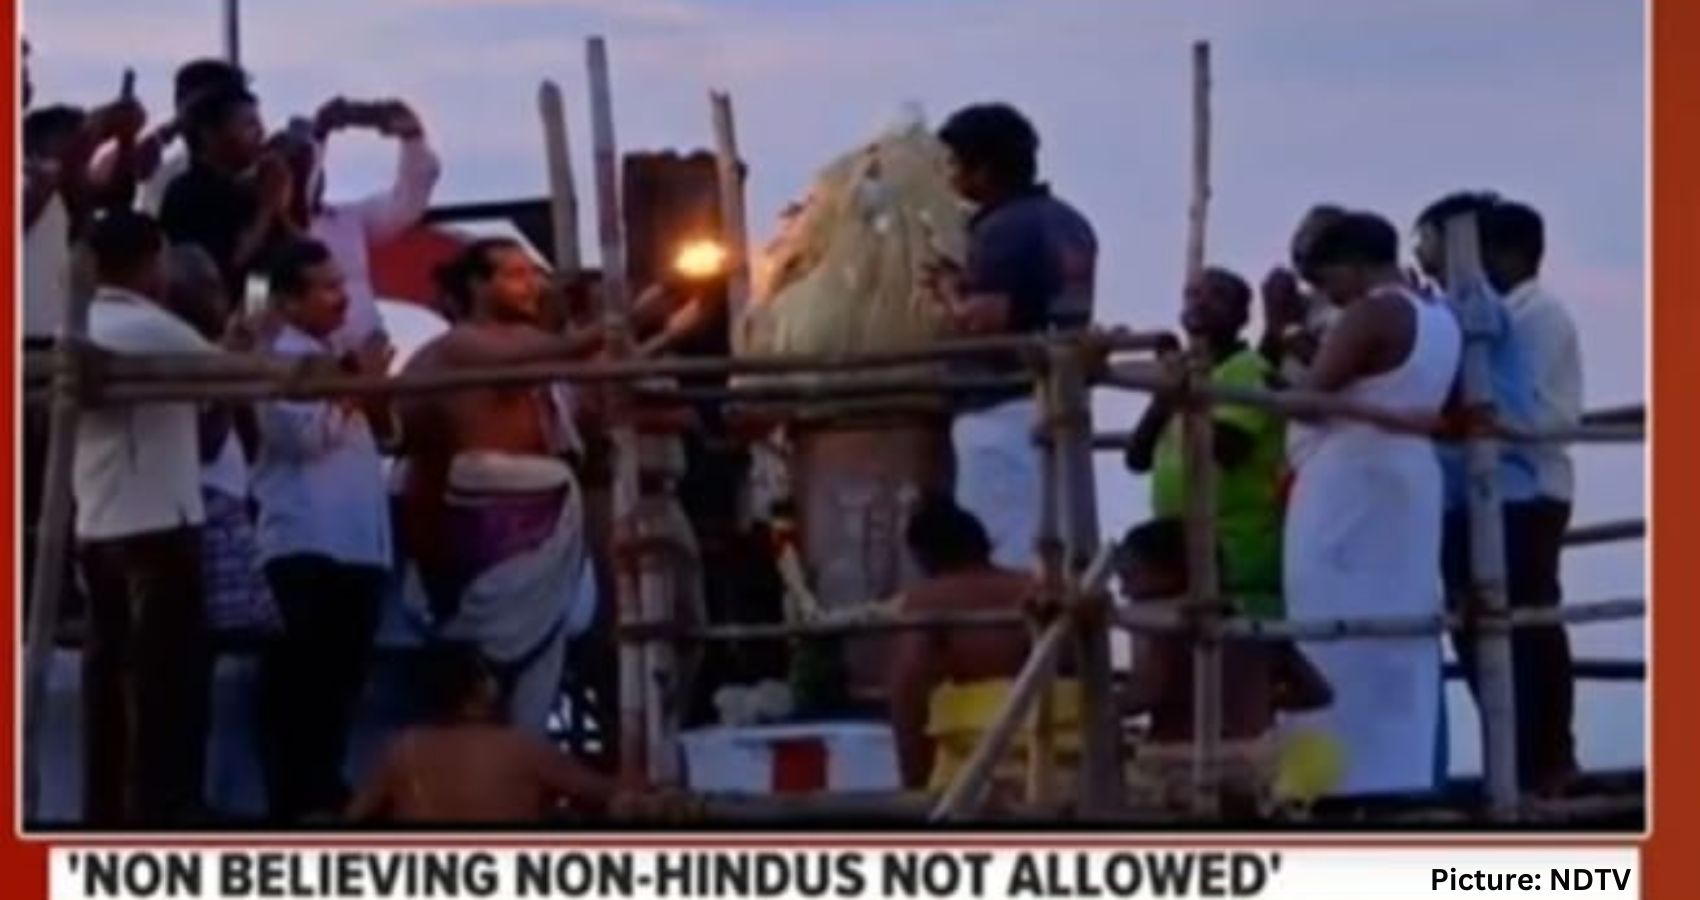 Madras High Court Orders Signage Restricting Non-Hindus in Temples to Uphold Hindu Rights